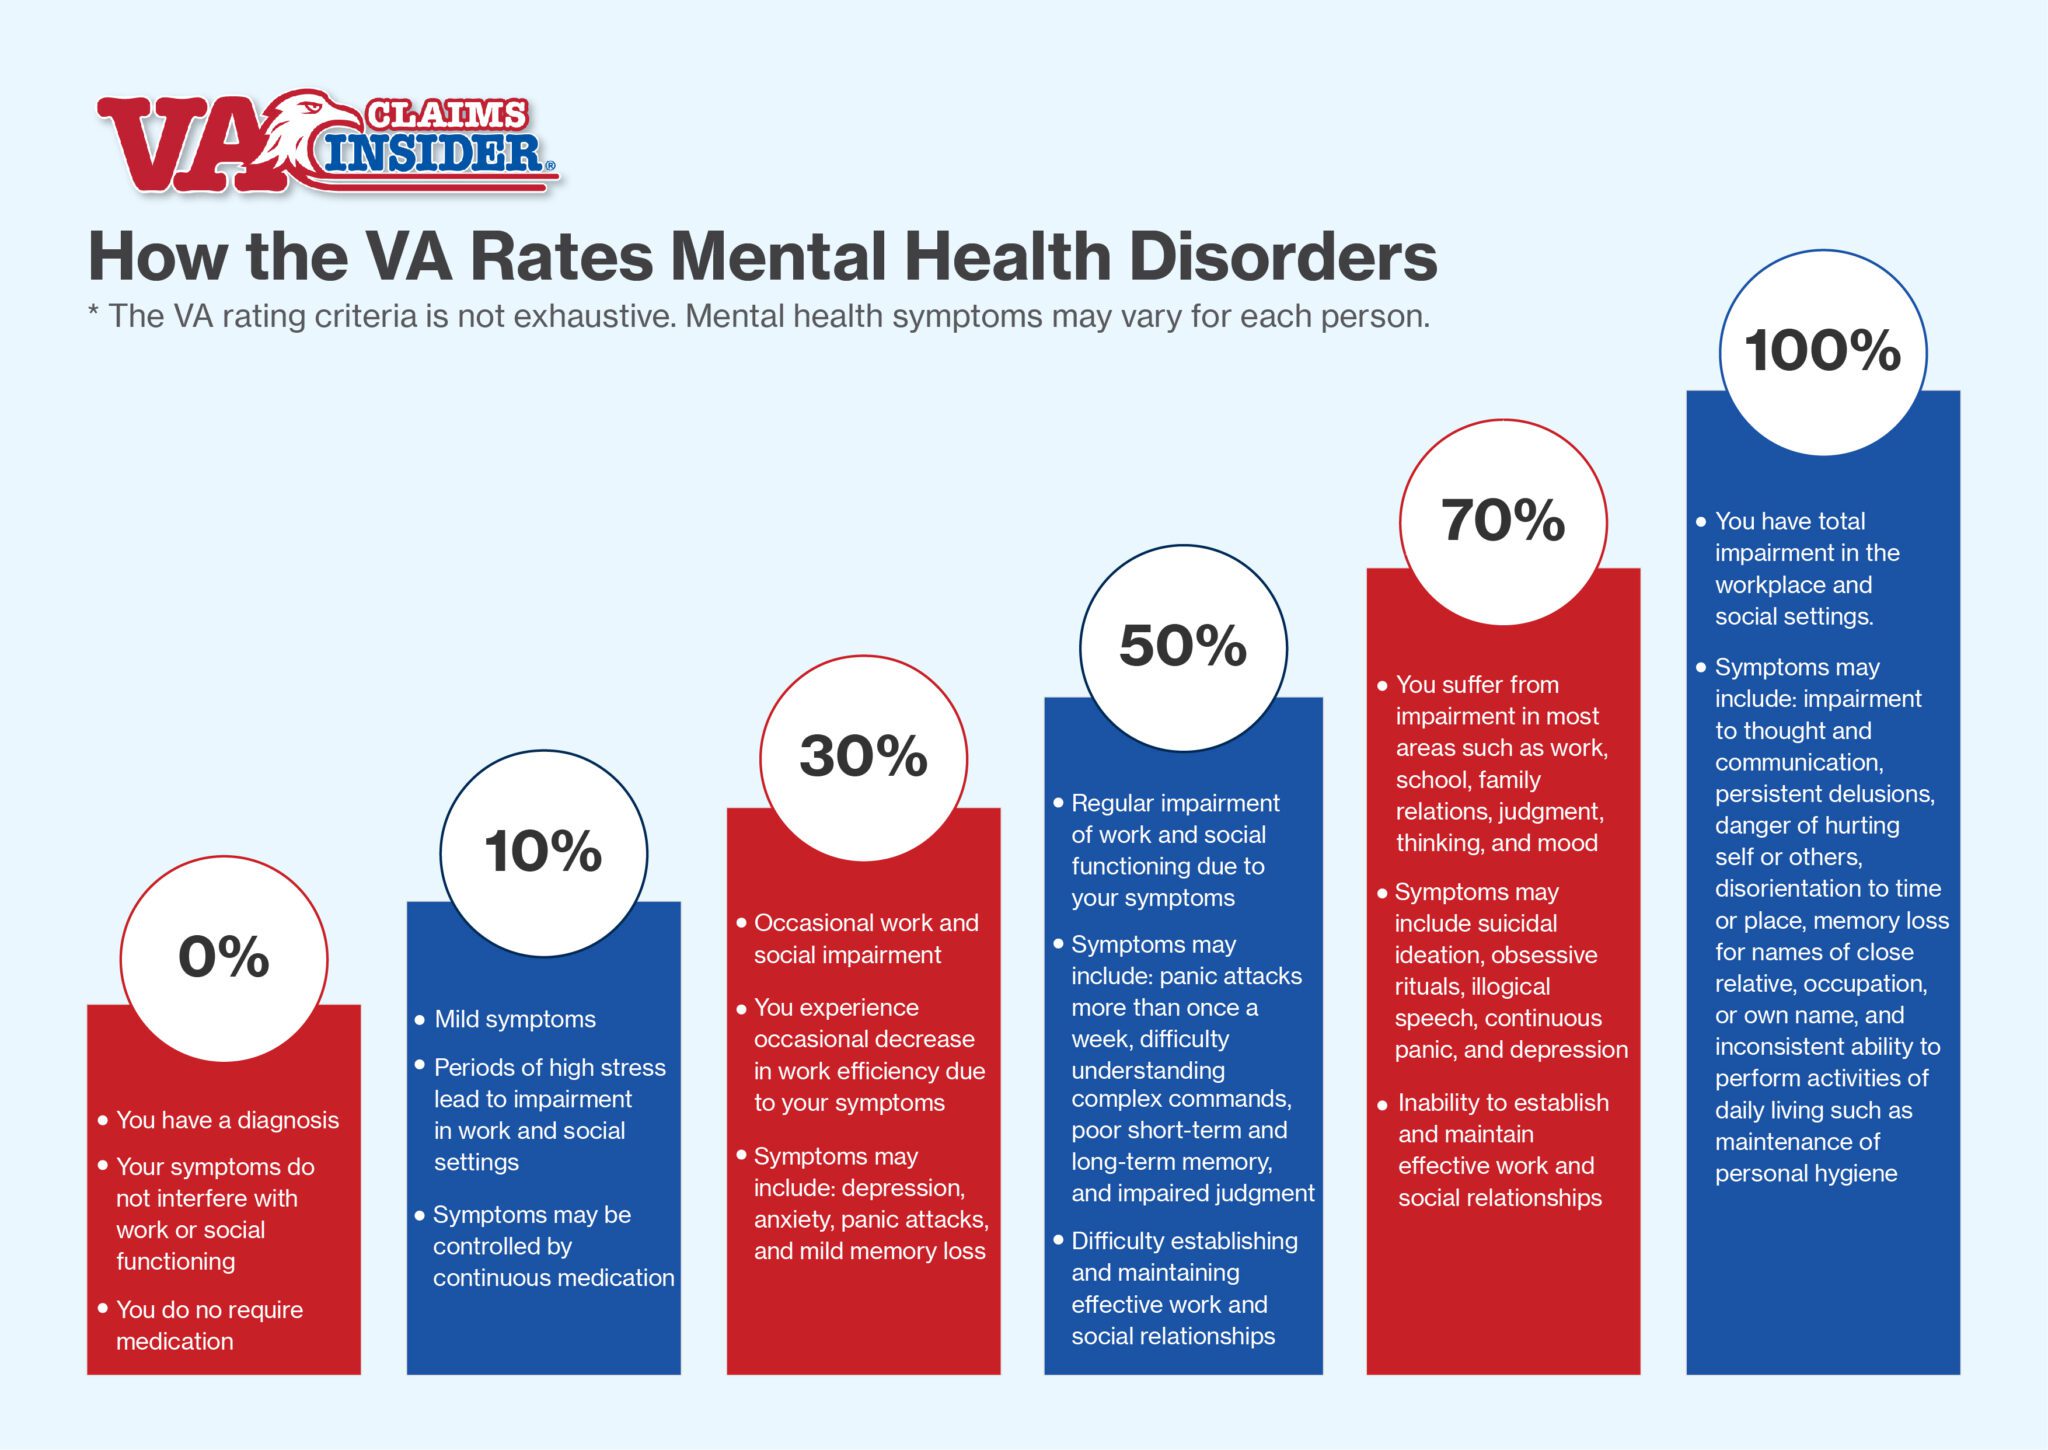 How to Get a VA Disability Rating for Substance Abuse